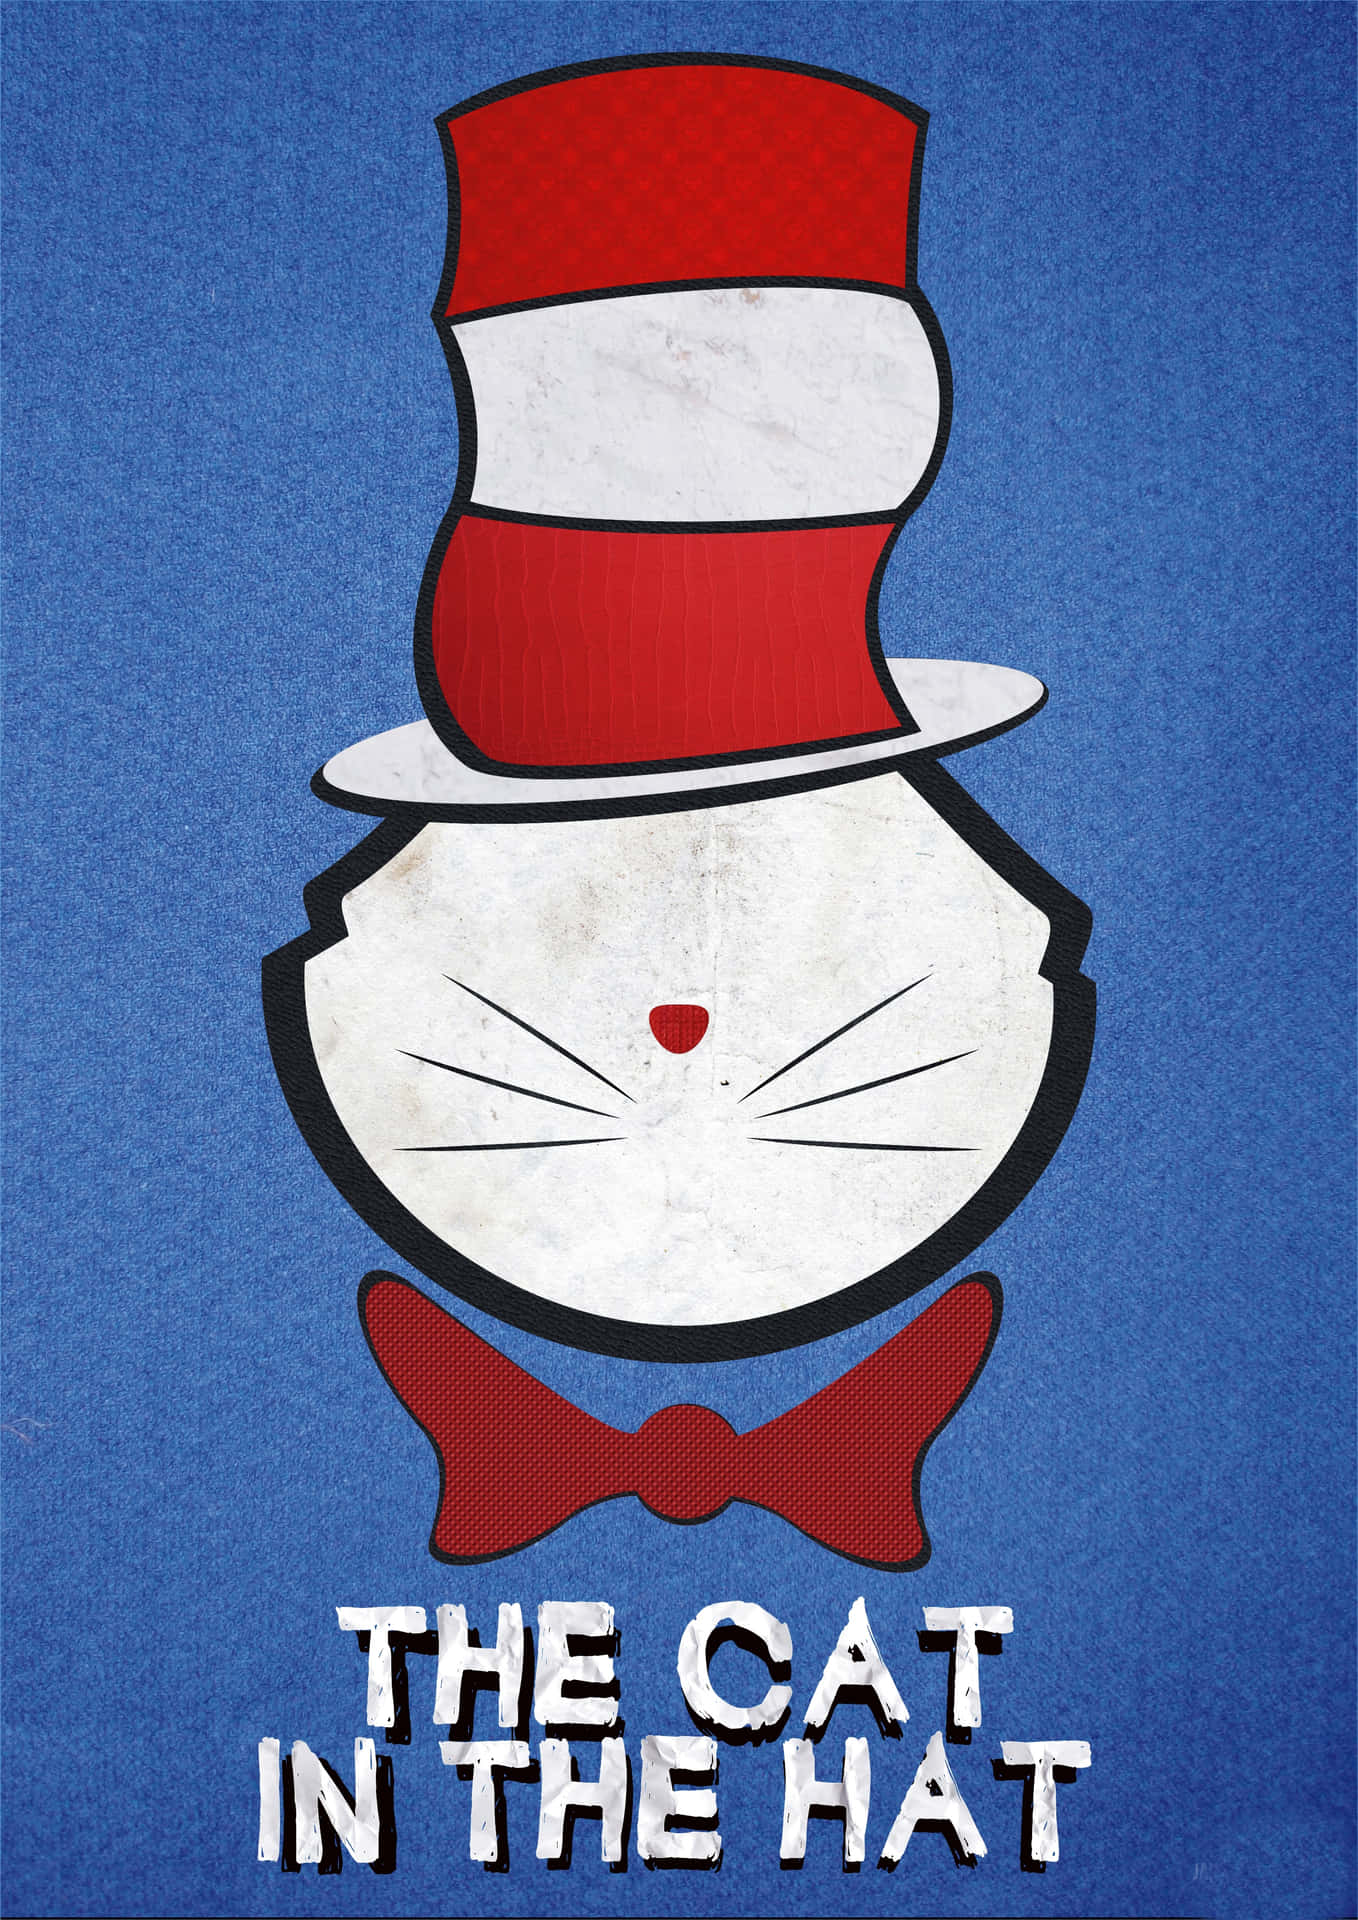 “The Cat in the Hat is Ready for Adventure!”